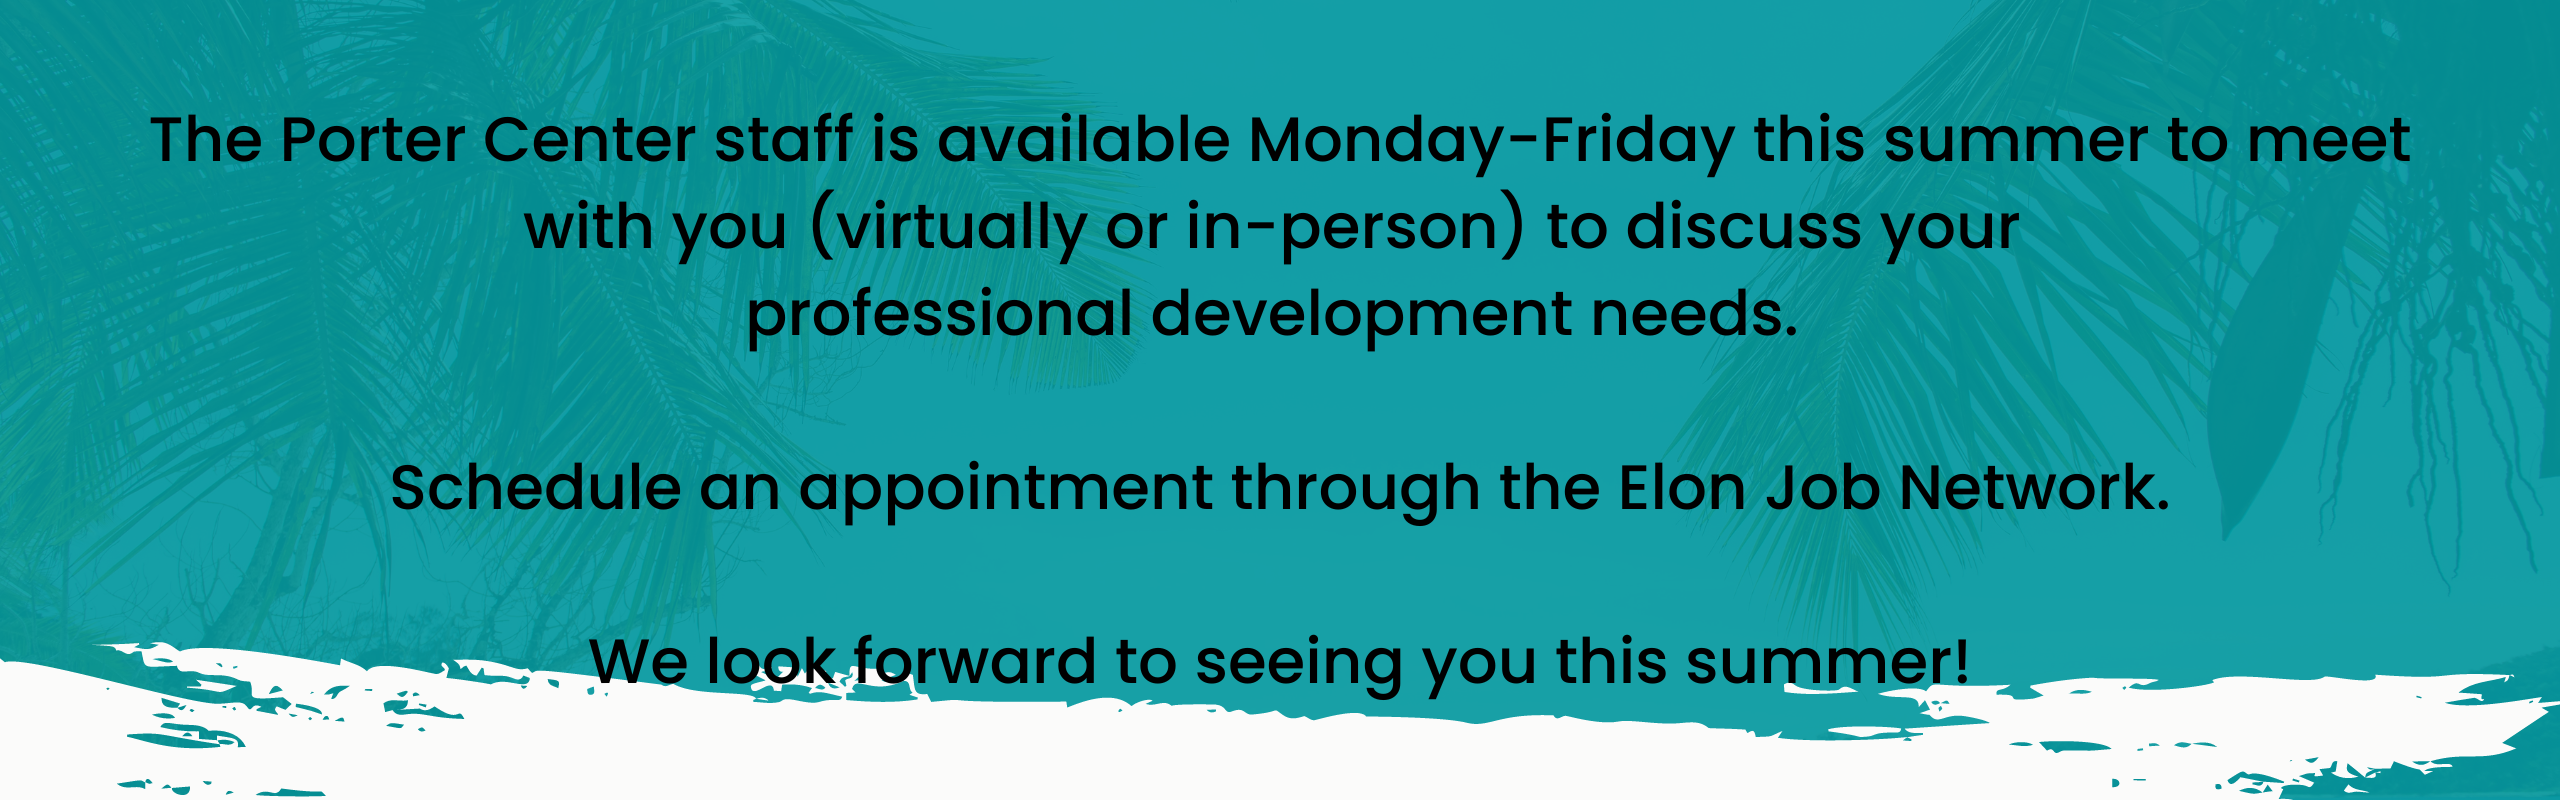 The Porter Center staff is available Monday-Friday this summer to meet with you (virtually or in person) to discuss your professional development needs. Schedule an appointment through the Elon Job Network. We look forward to seeing you this summer!